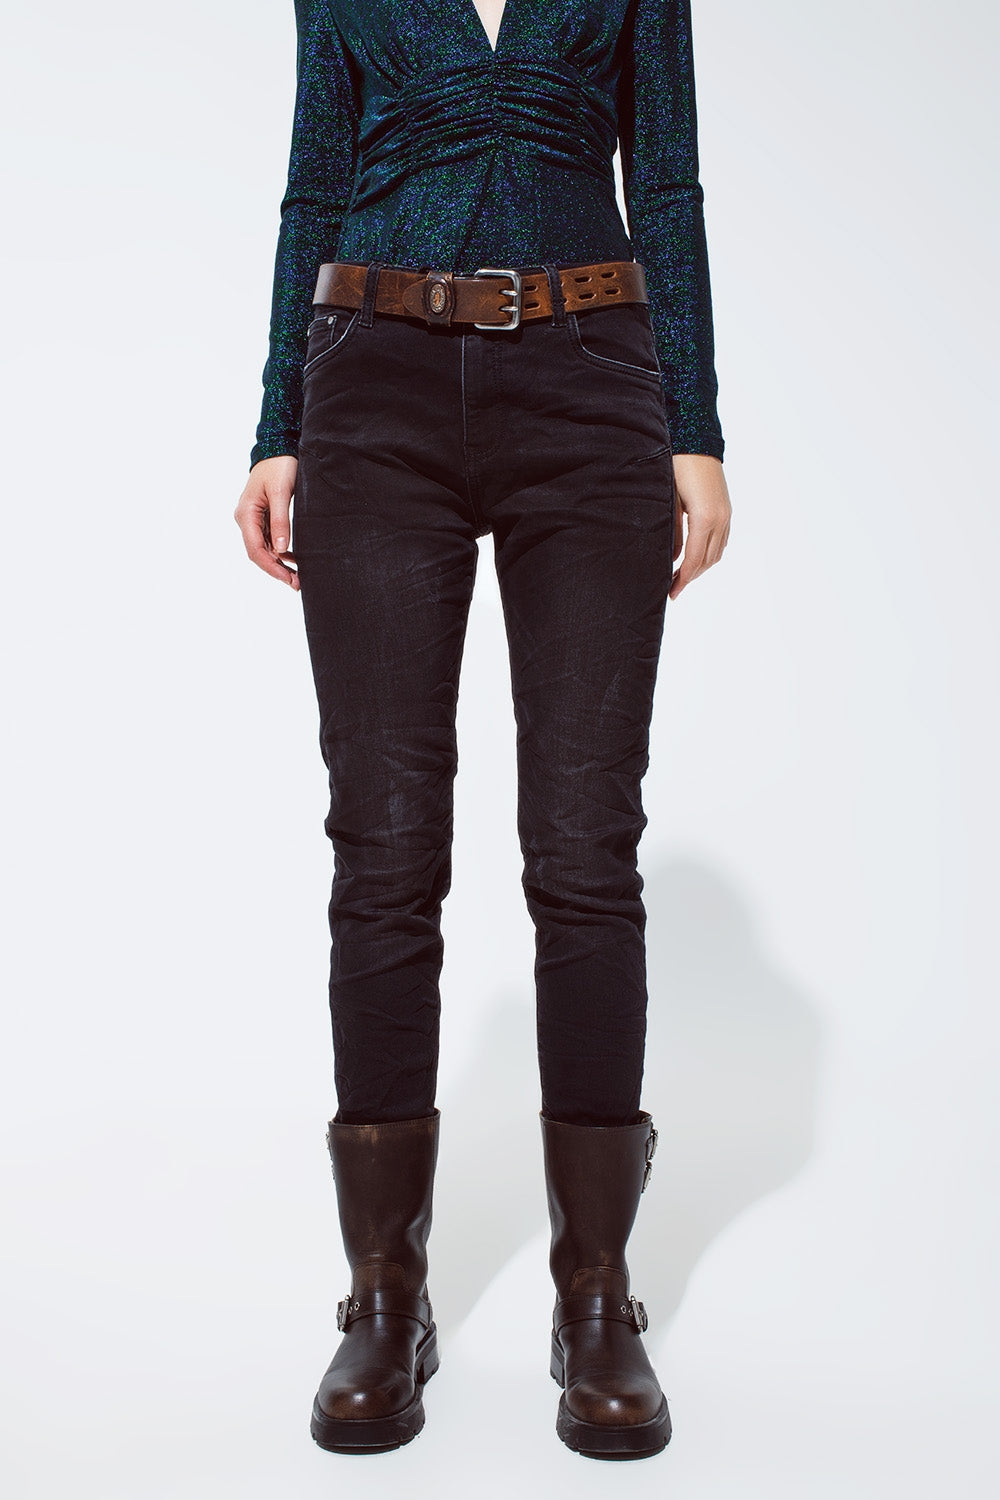 Q2 black jeans with elastic waist and cord